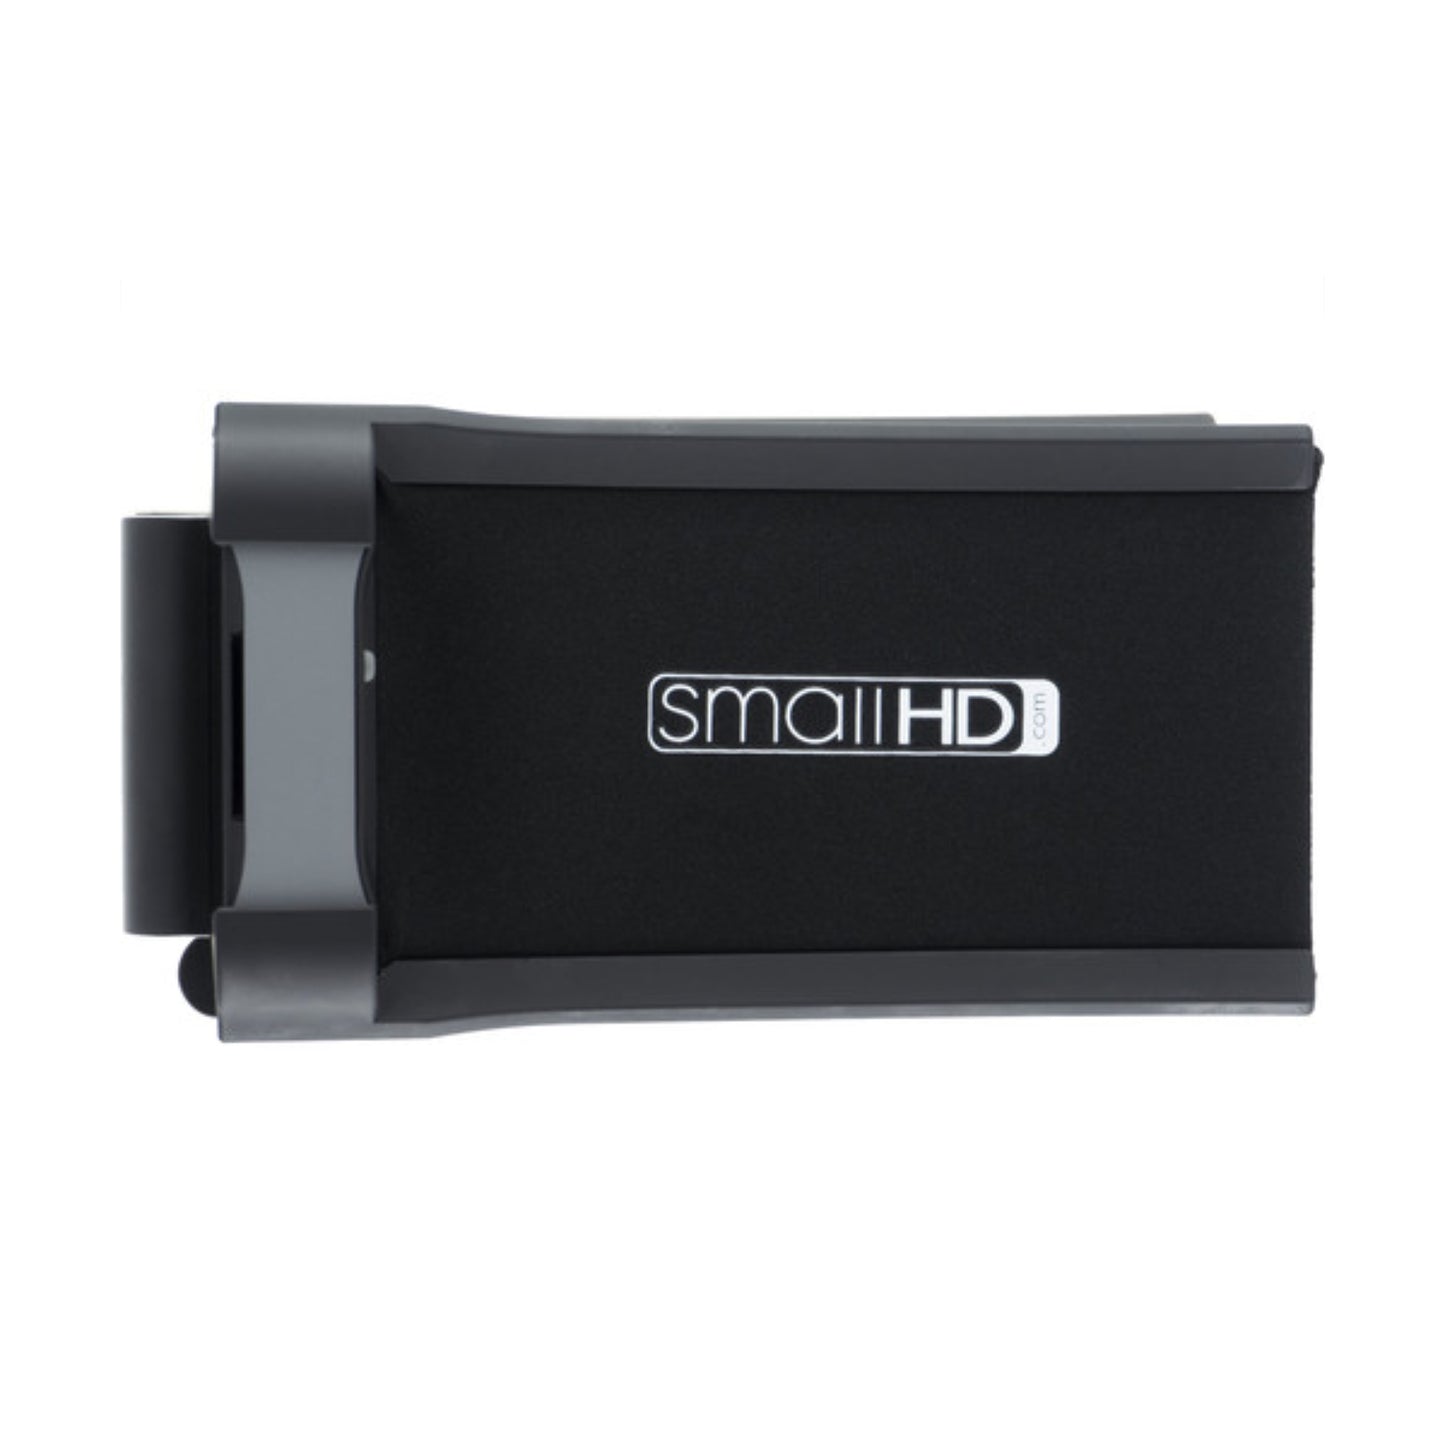 Buy Small HD sunhood for 500 series monitor at Topic Store